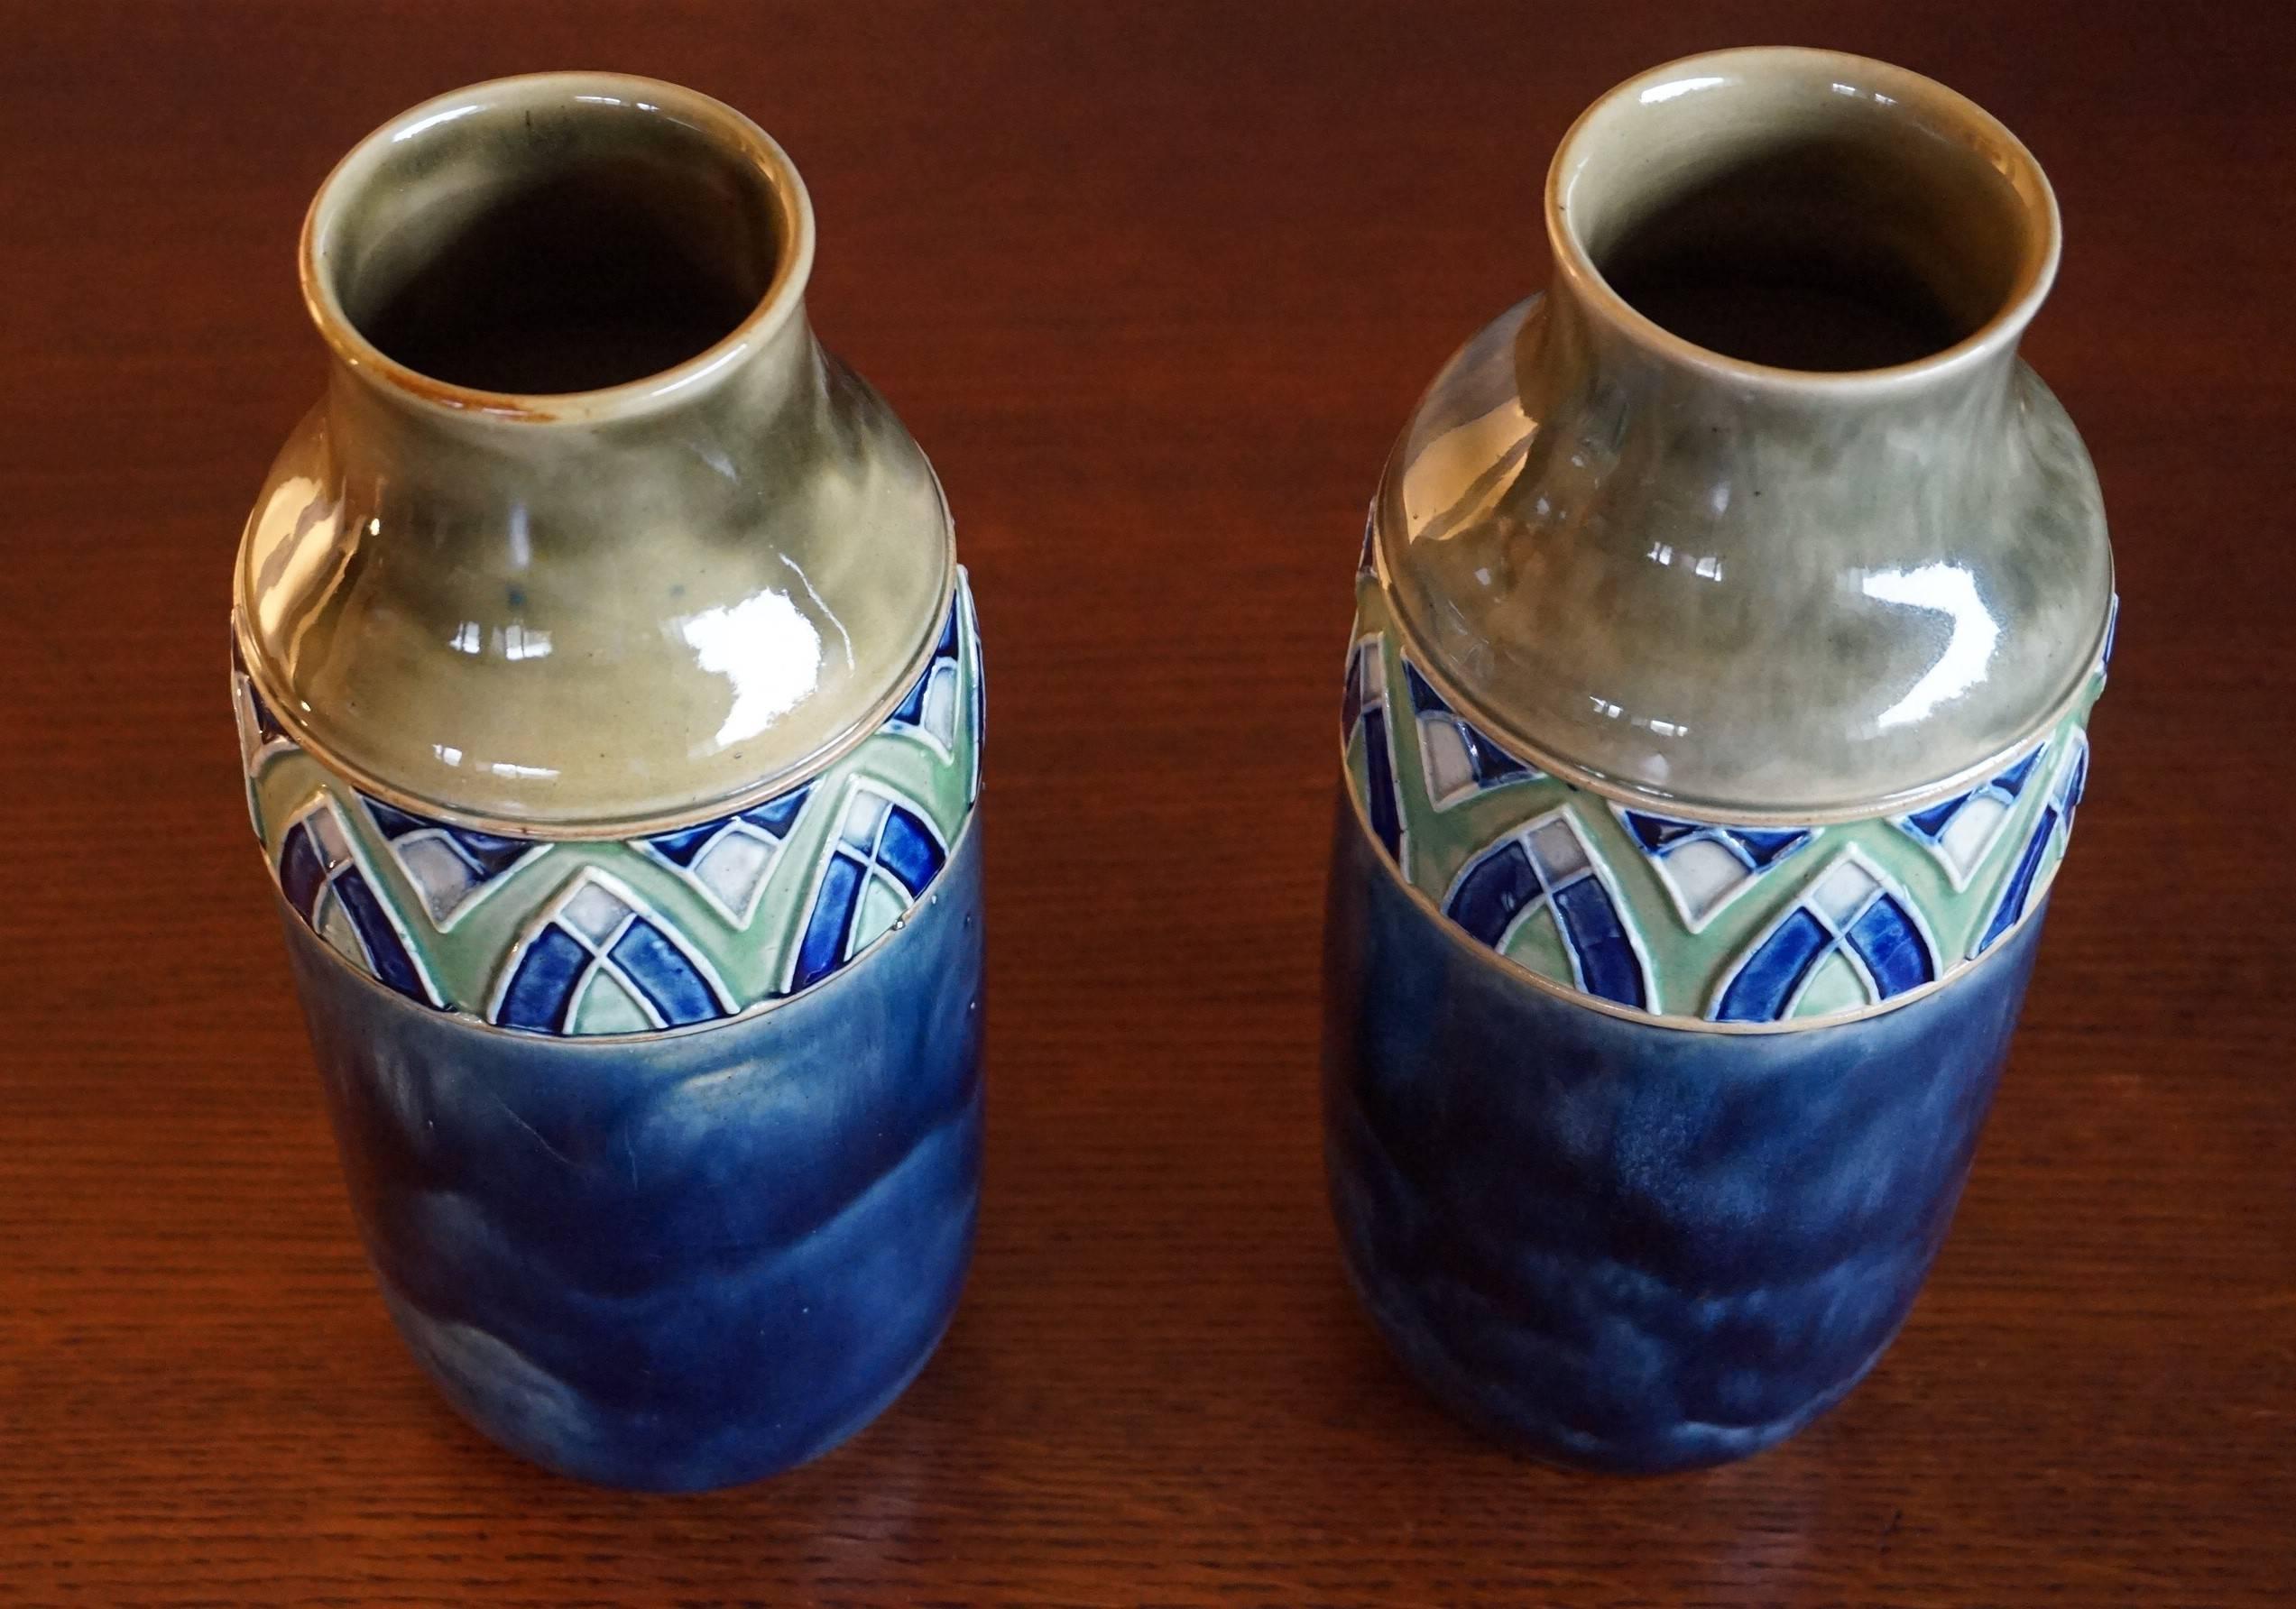 Glazed Great Quality & Condition Pair of Arts and Crafts Ceramic Vases by Royal Doulton For Sale